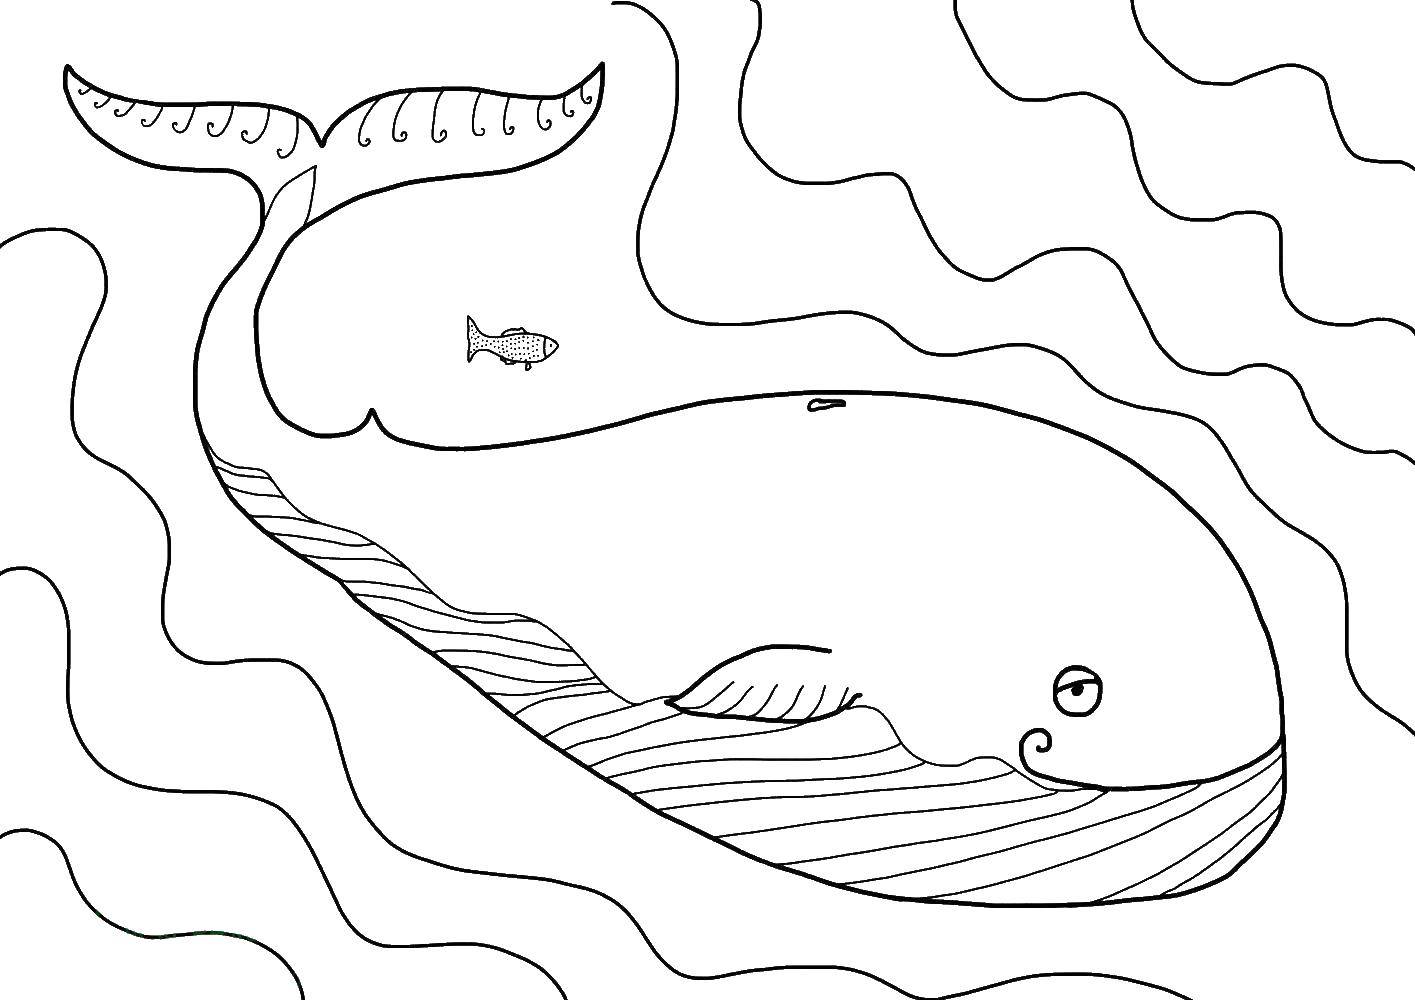 Coloring A whale swims along with the fish. Category marine. Tags:  Underwater, whale, waves.